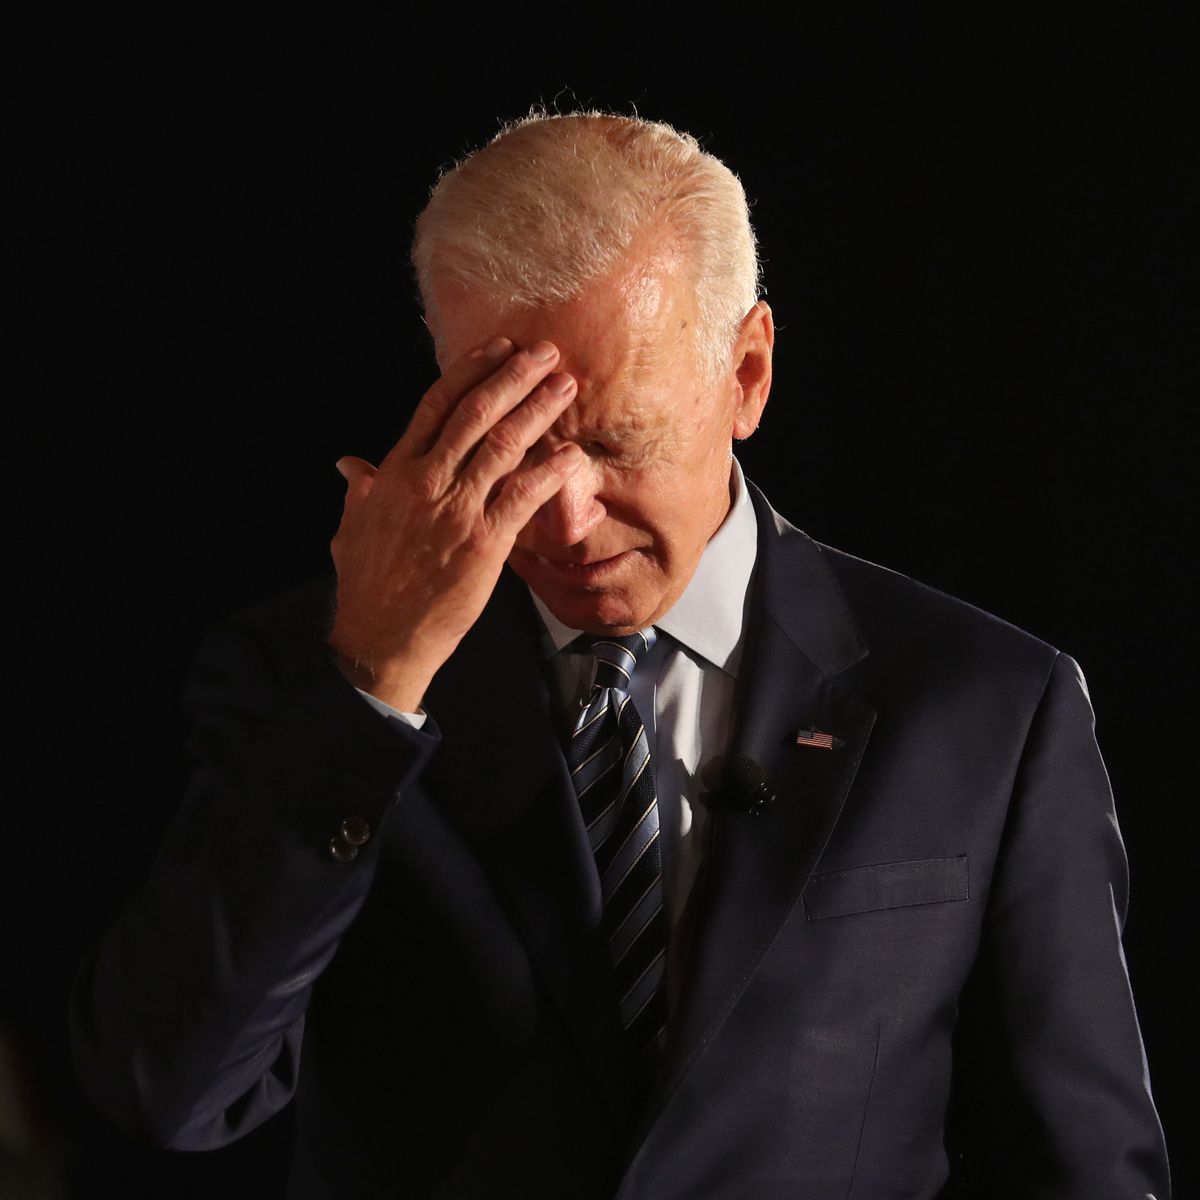 how did congress agree to send joe biden to fire the ukrainian prosecutor - Biden|President|Joe|Years|Trump|Delaware|Vice|Time|Obama|Senate|States|Law|Age|Campaign|Election|Administration|Family|House|Senator|Office|School|Wife|People|Hunter|University|Act|State|Year|Life|Party|Committee|Children|Beau|Daughter|War|Jill|Day|Facts|Americans|Presidency|Joe Biden|United States|Vice President|White House|Law School|President Trump|Foreign Relations Committee|Donald Trump|President Biden|Presidential Campaign|Presidential Election|Democratic Party|Syracuse University|United Nations|Net Worth|Barack Obama|Judiciary Committee|Neilia Hunter|U.S. Senate|Hillary Clinton|New York Times|Obama Administration|Empty Store Shelves|Systemic Racism|Castle County Council|Archmere Academy|U.S. Senator|Vice Presidency|Second Term|Biden Administration